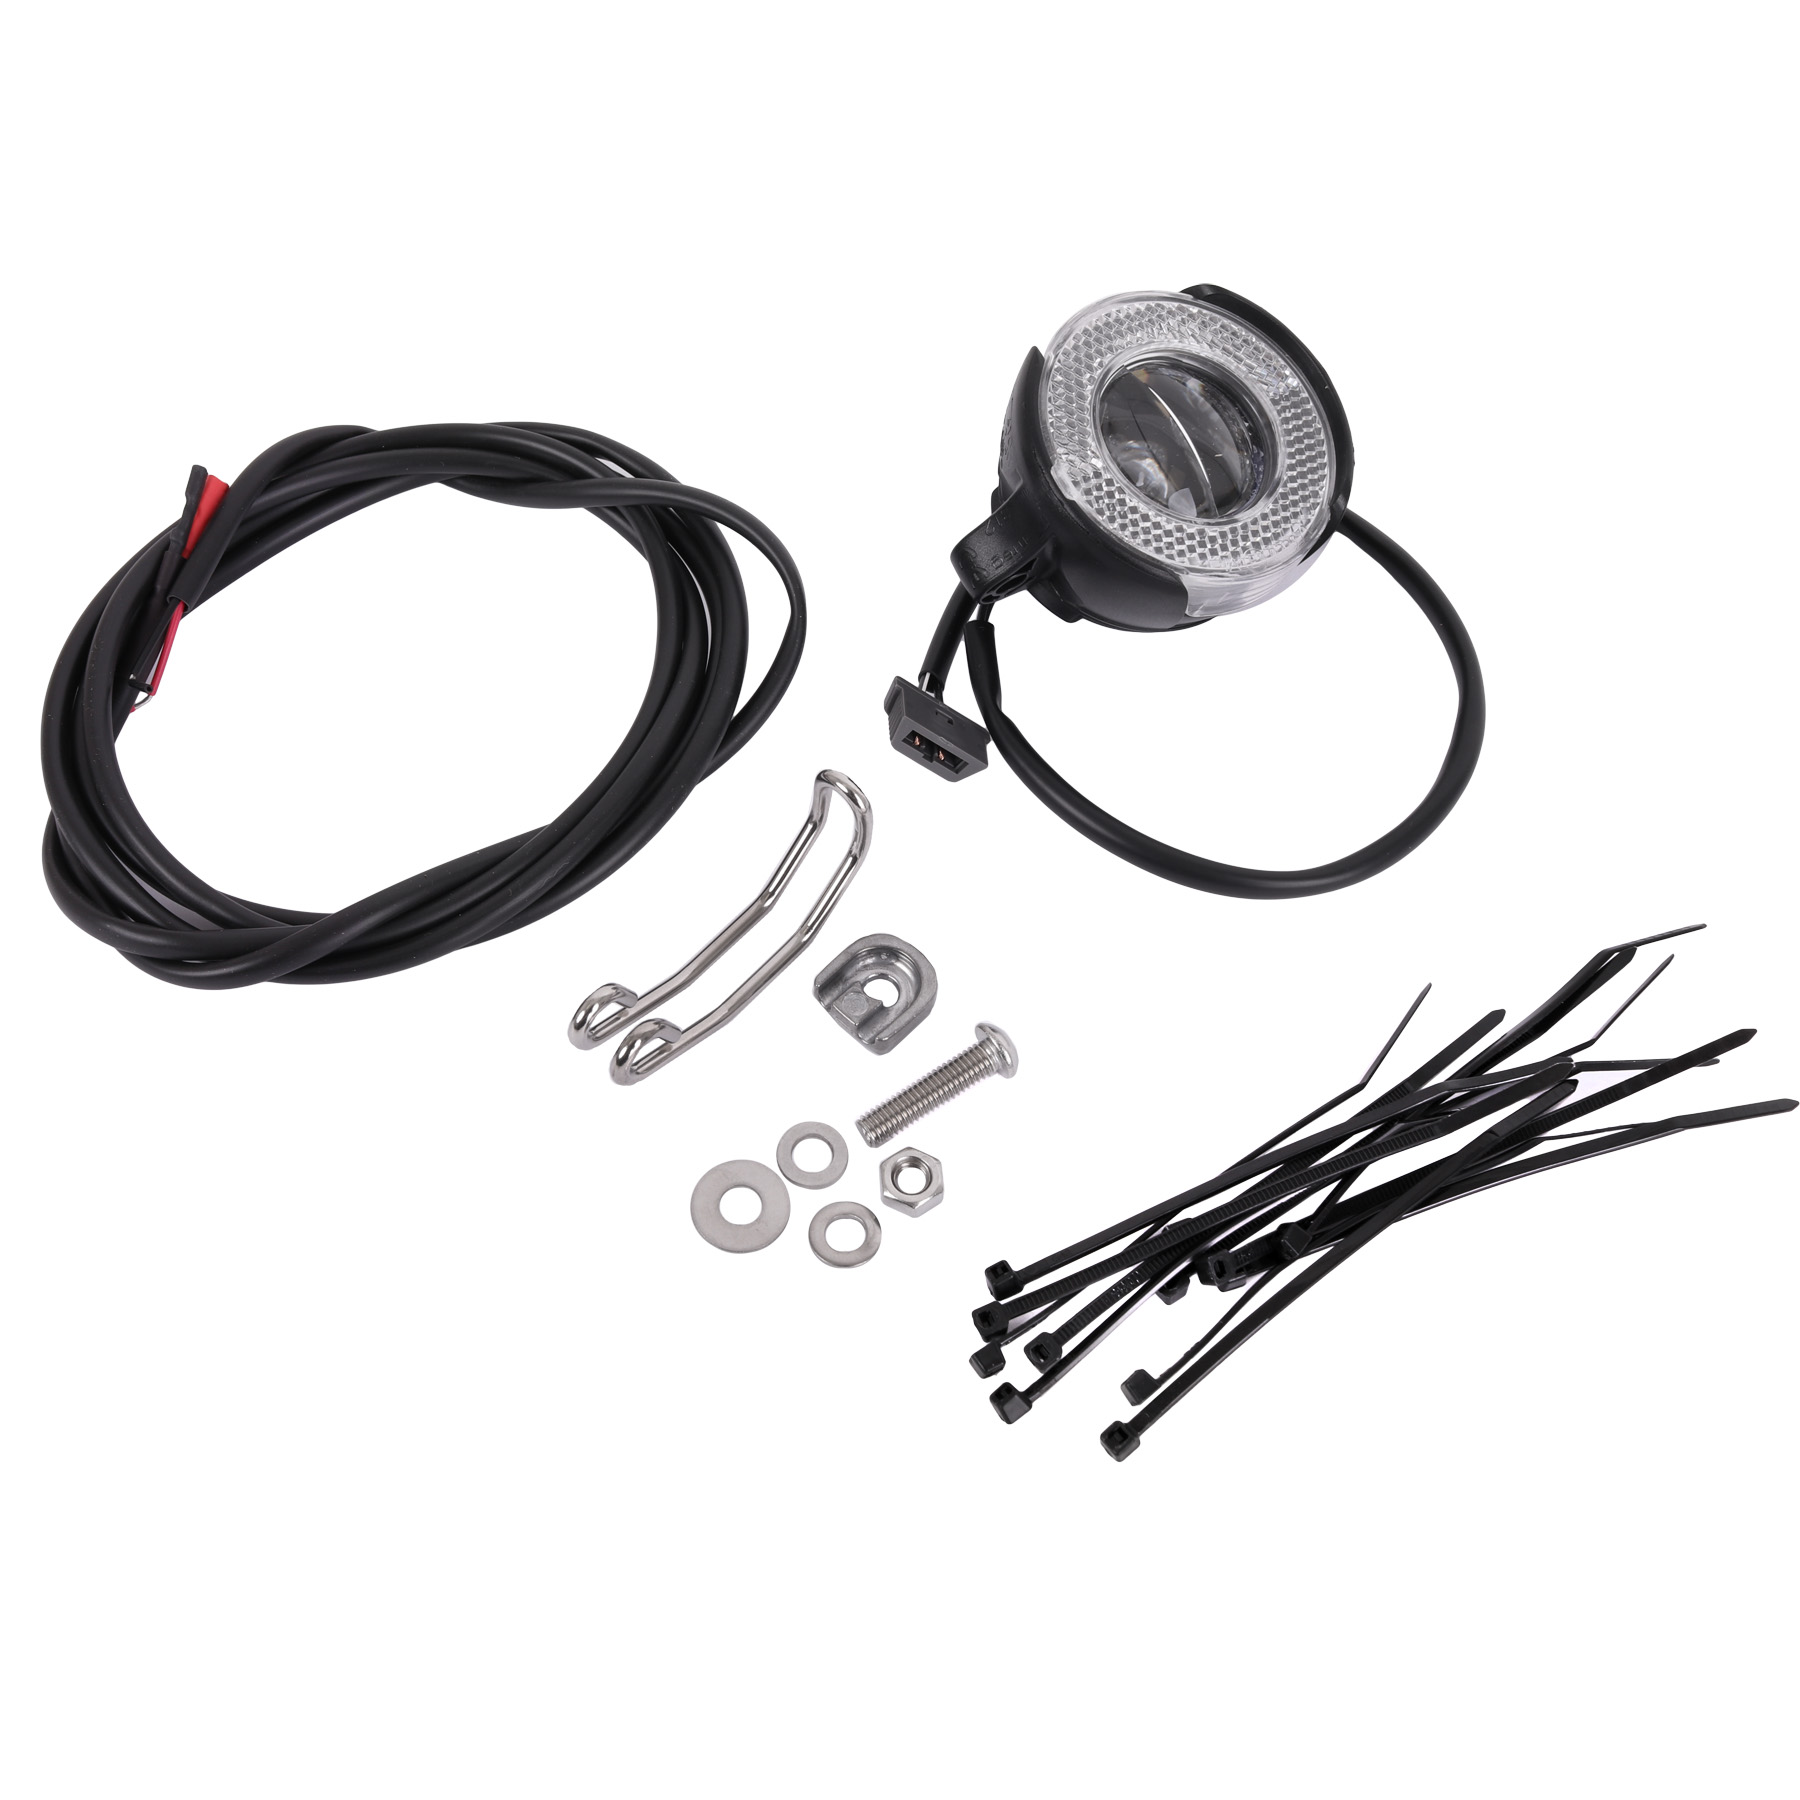 Picture of Brompton Front Lamp Kit for Shutter Precision SV8 Dynamo Hub